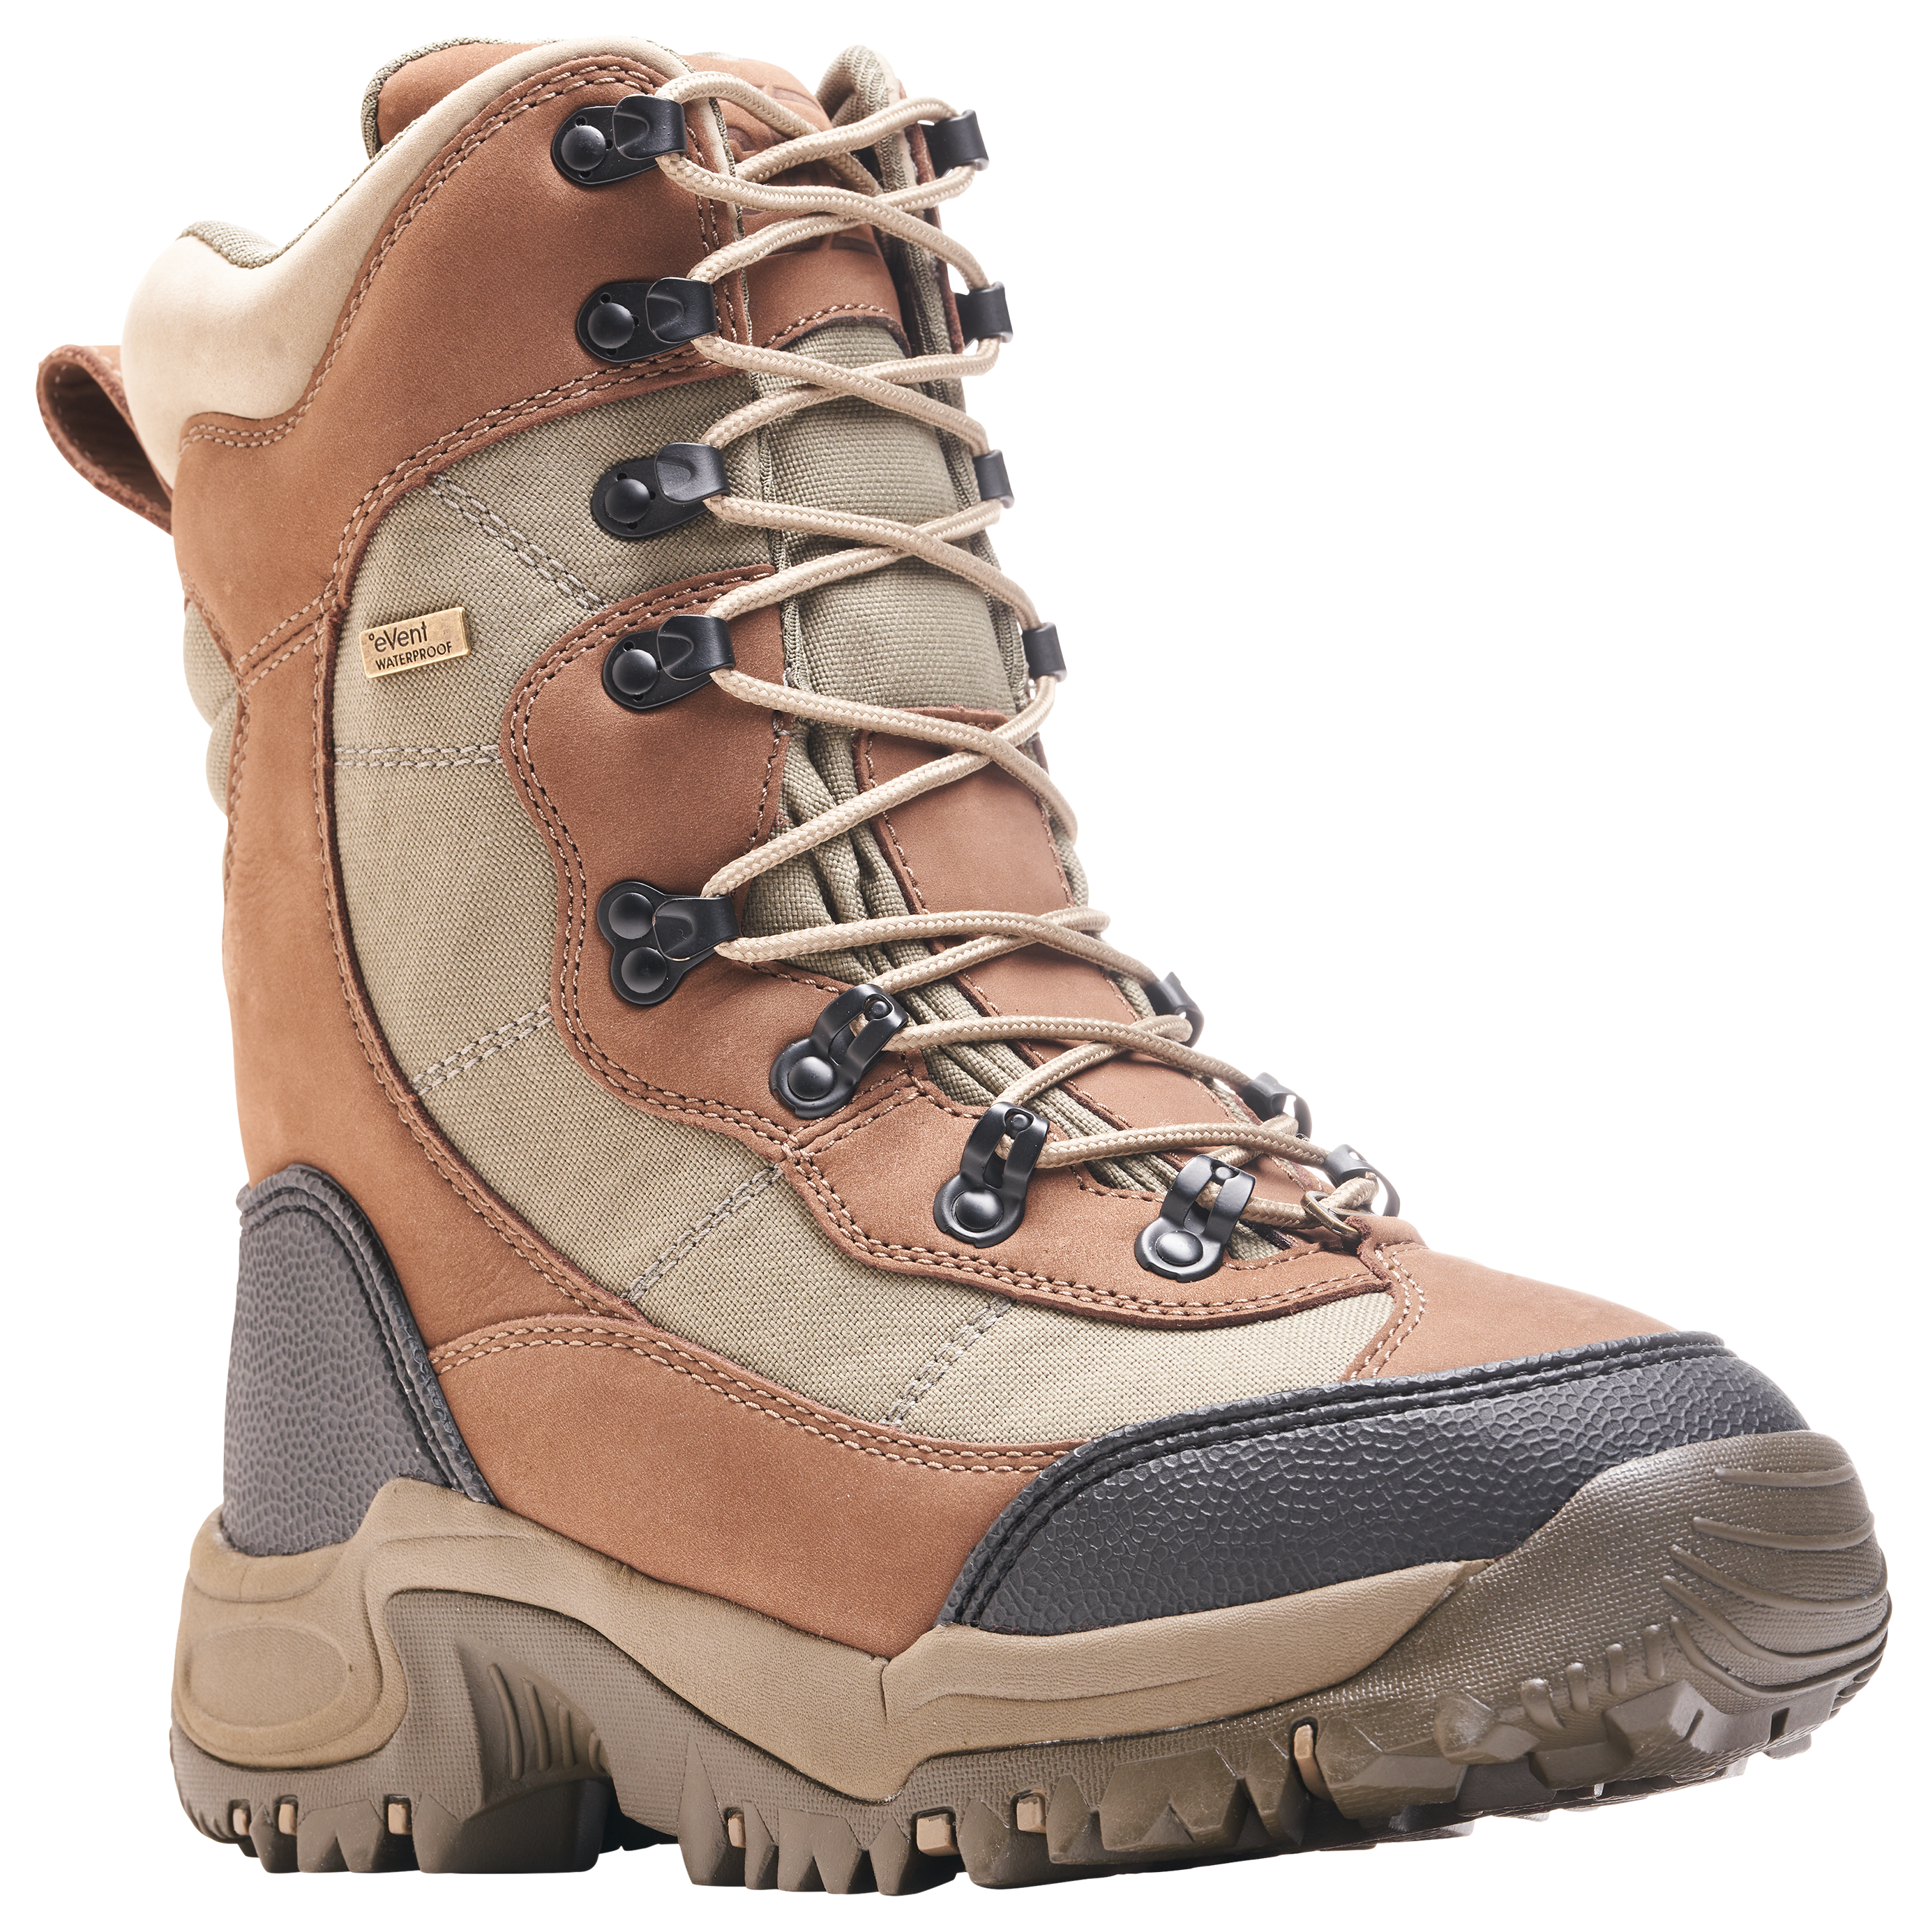 SHE Outdoor Inferno II Insulated Waterproof Hunting Boots for Ladies - Brown - 8M